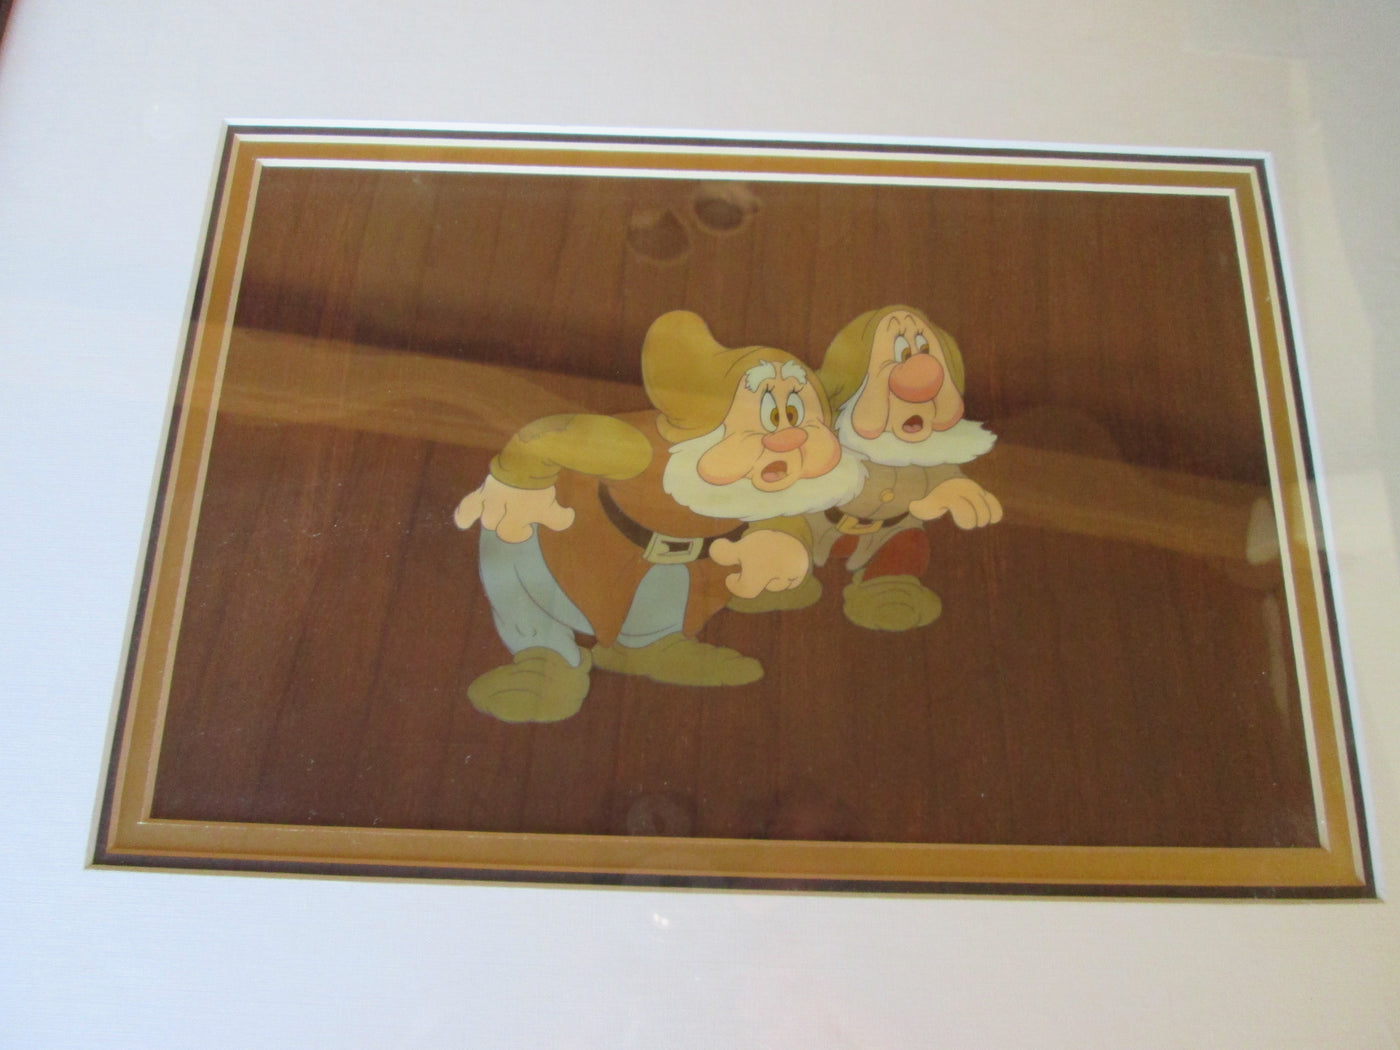 Original Walt Disney Production Cel on Custom Woodgrain Background from Snow White and the Seven Dwarfs featuring Happy and Sneezy